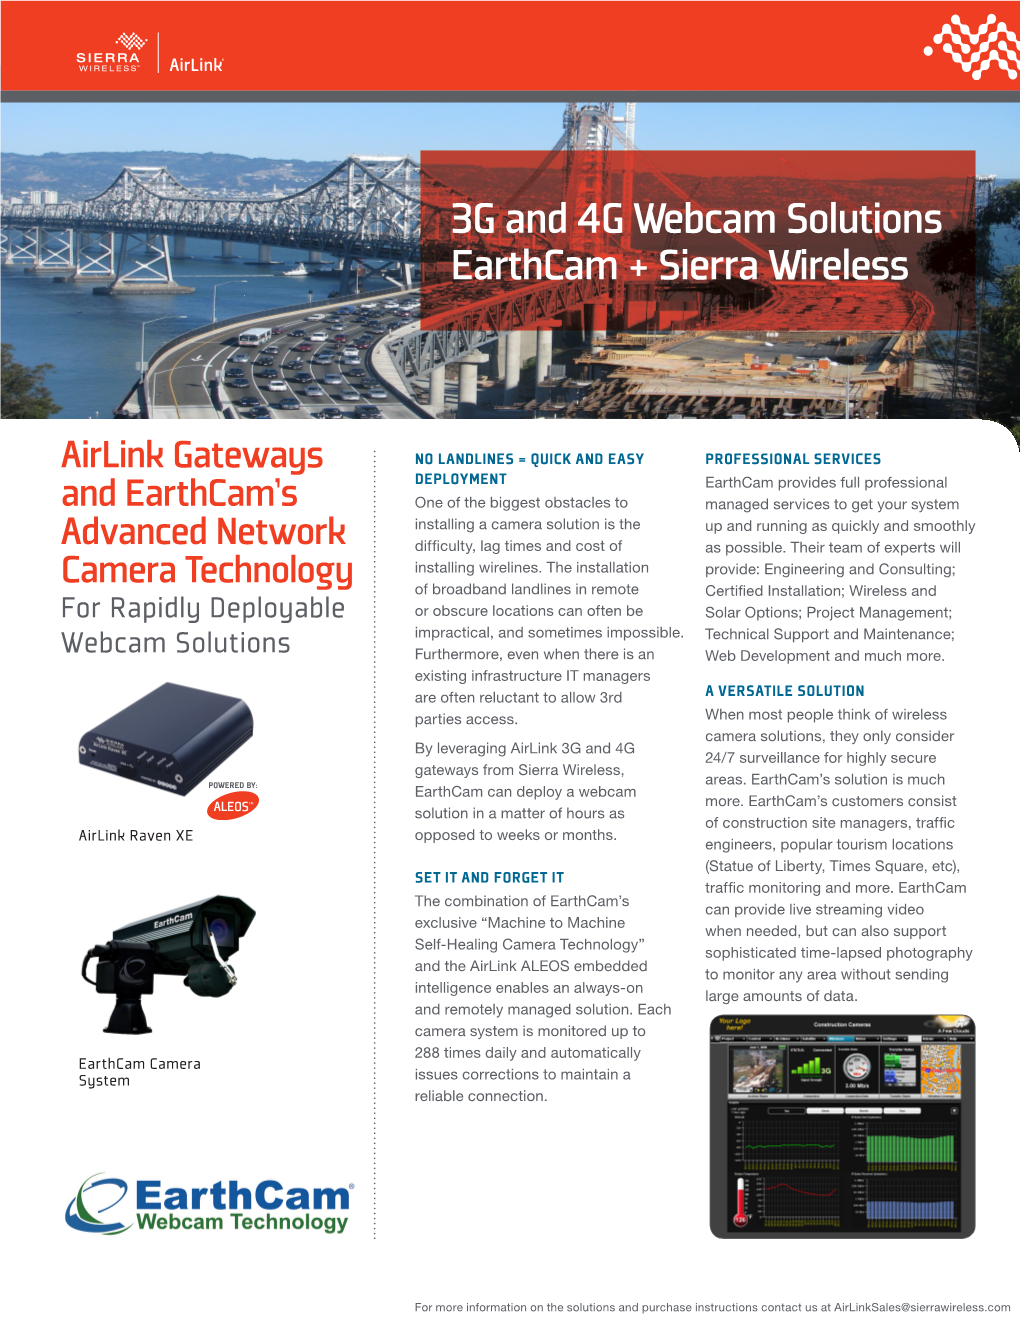 3G and 4G Webcam Solutions Earthcam + Sierra Wireless